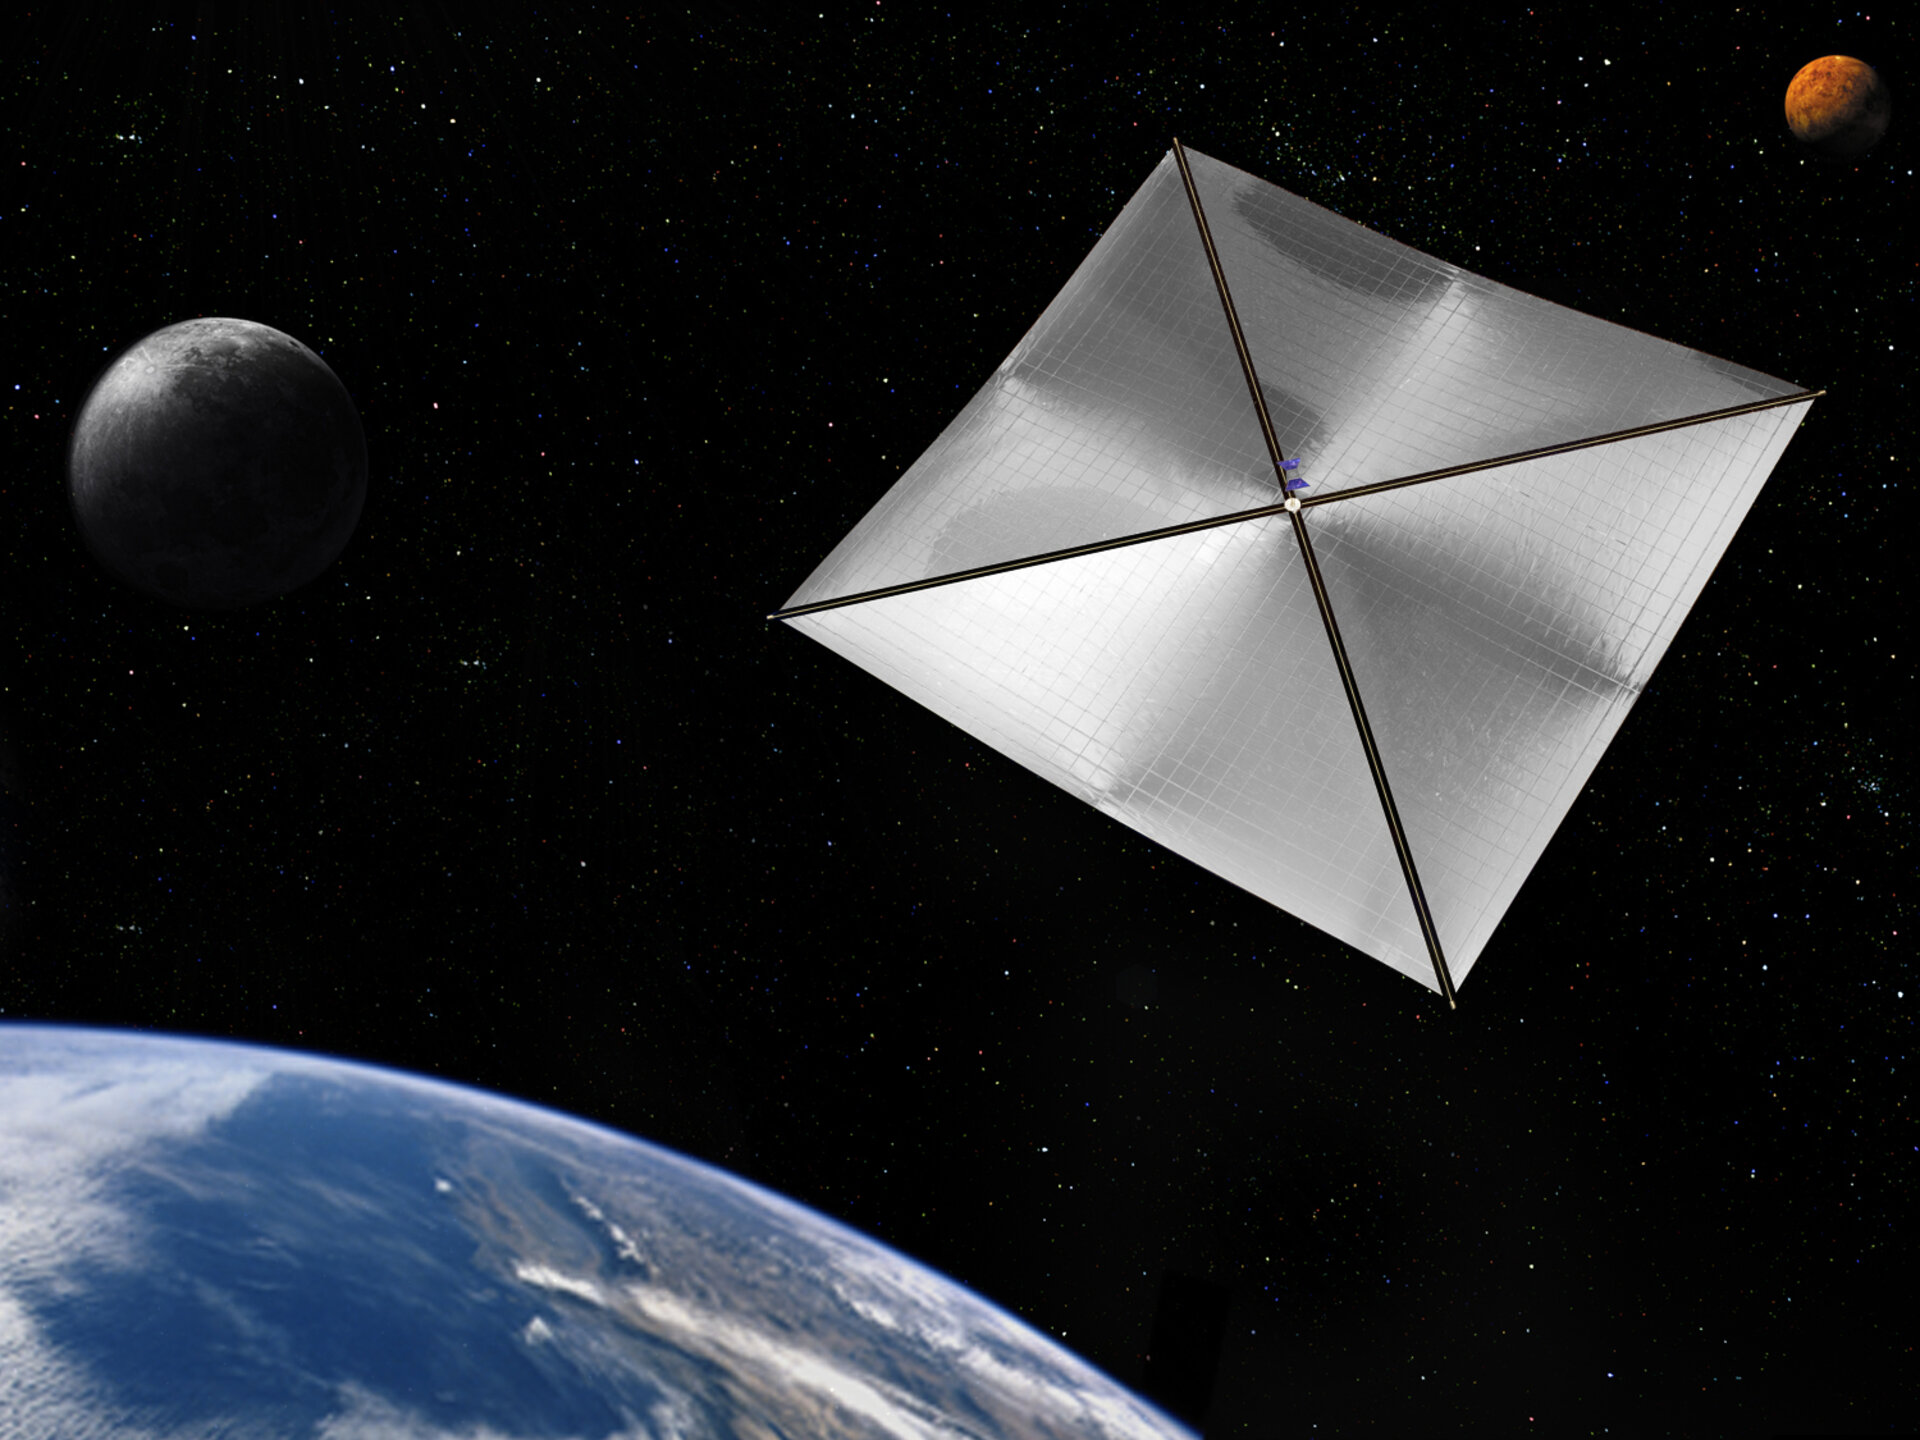 Solar sail could be used for deorbiting satellites